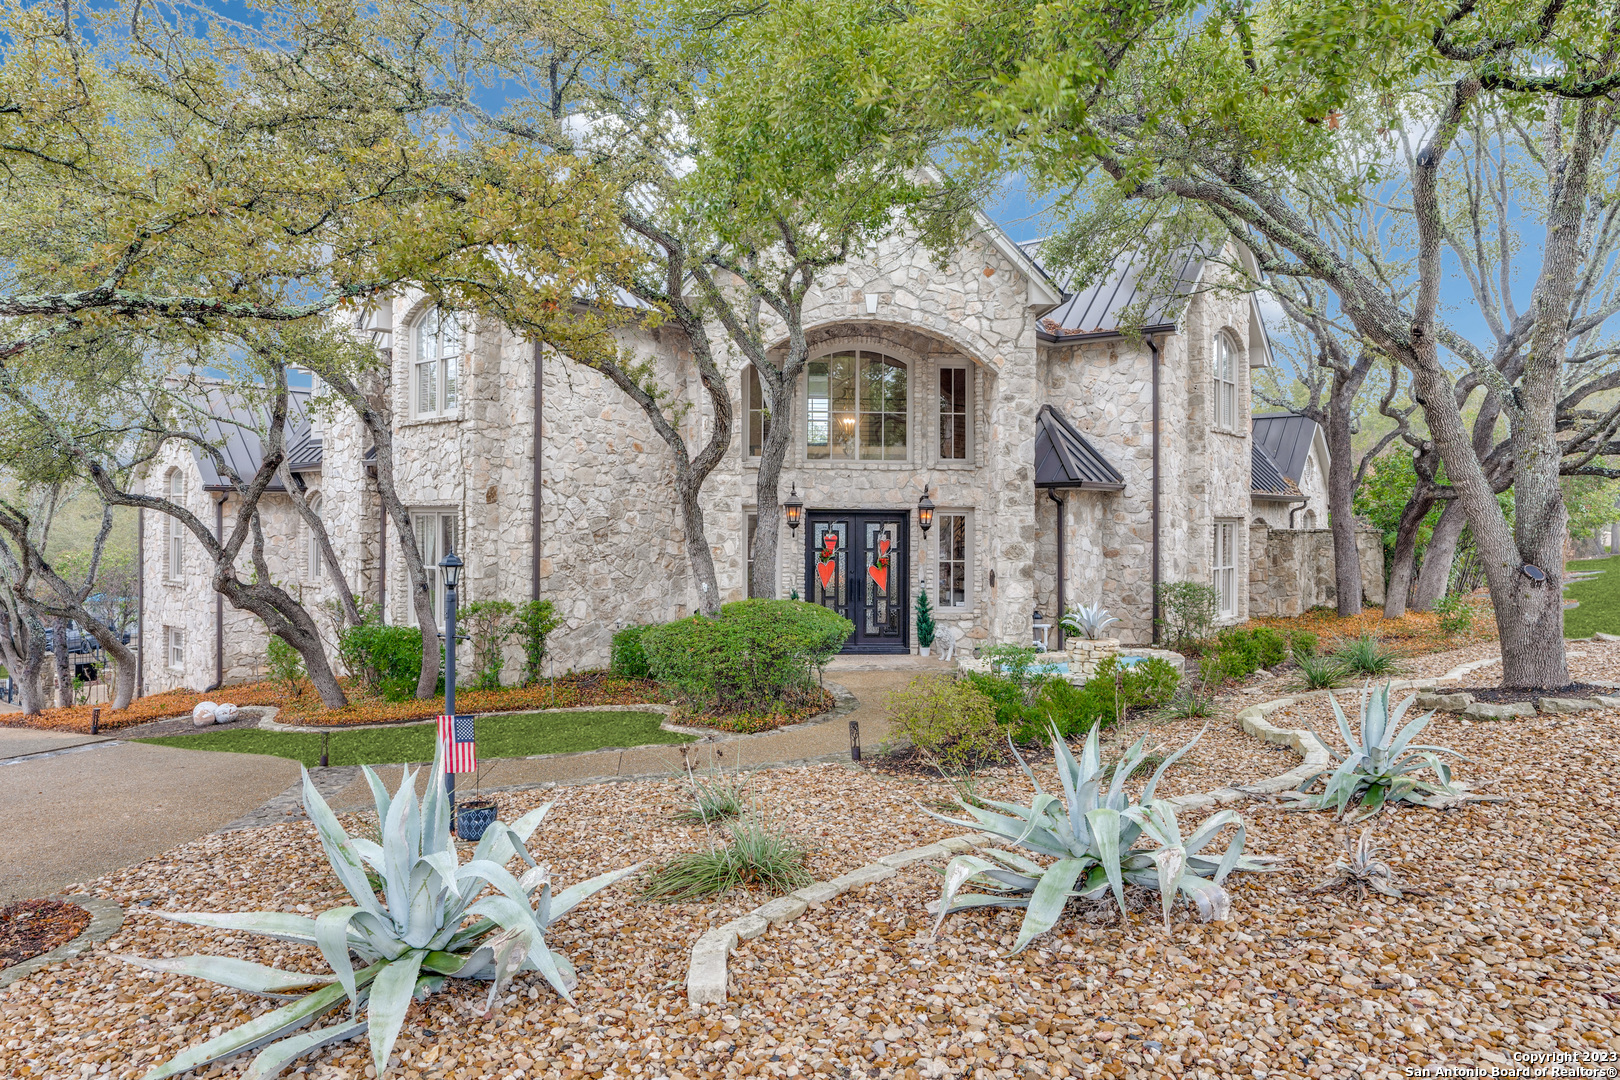 Exquisite, finely-detailed transitional modern estate in the luxurious subdivision of Dominion. This community offers an option to be a member of one of the premier private country clubs in San Antonio. A rare find, nearly an acre of land! The exterior has a regal fashion that consists of natural stone with a breathtaking double door front entrance. The interior has been professionally designed and decorated with wains coated ceilings, custom cabinetry, stone accents, recently renovated staircases, wet bar and a rich wood paneled study. 5 bedroom, 5.5 baths, large game room, media room with newly added surround sound. Two fireplaces. Primary and  a secondary is on main floor. Oversized private backyard oasis with built in kitchen, over 28k recently renovated salt water Kieth Zars heated pool, and spa. Roof and garage doors replaced in 2020, subzero built in fridge, Jenn air gas multi burner stove range with double ovens, Bosch dishwasher. Schedule a private tour now!